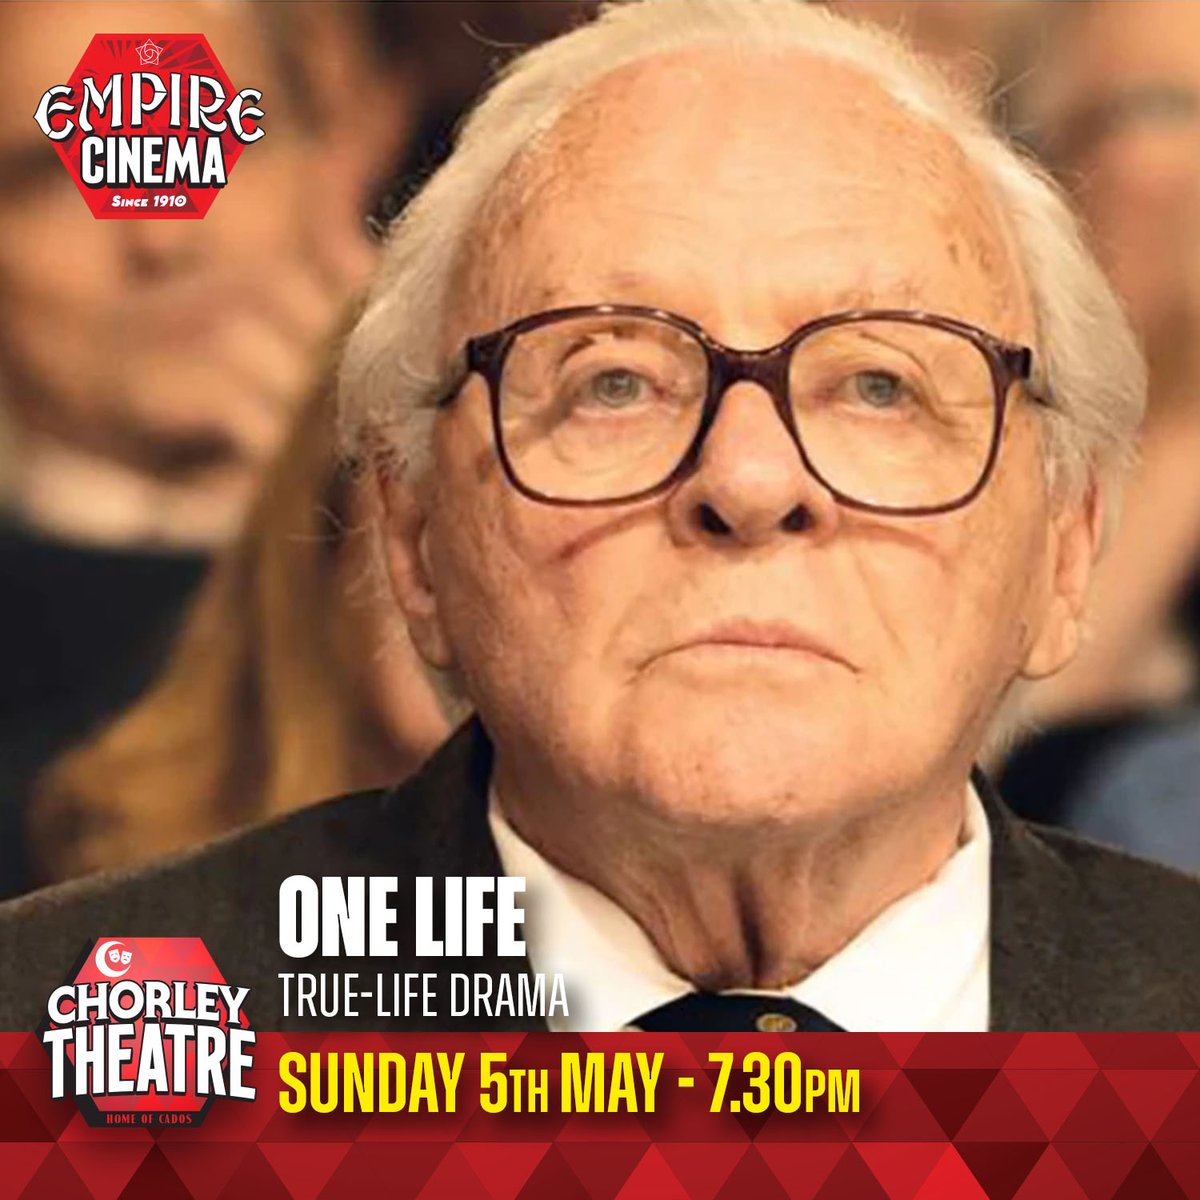 This Sunday, the moving true-life drama One Life is on our cinema screen. Anthony Hopkins stars as Nicholas Winton, who’s fight to rescue Jewish children from the Nazis was made famous on Esther Rantzen’s TV show That’s Life. 7.30pm start ticketsource.co.uk/chorleytheatre…